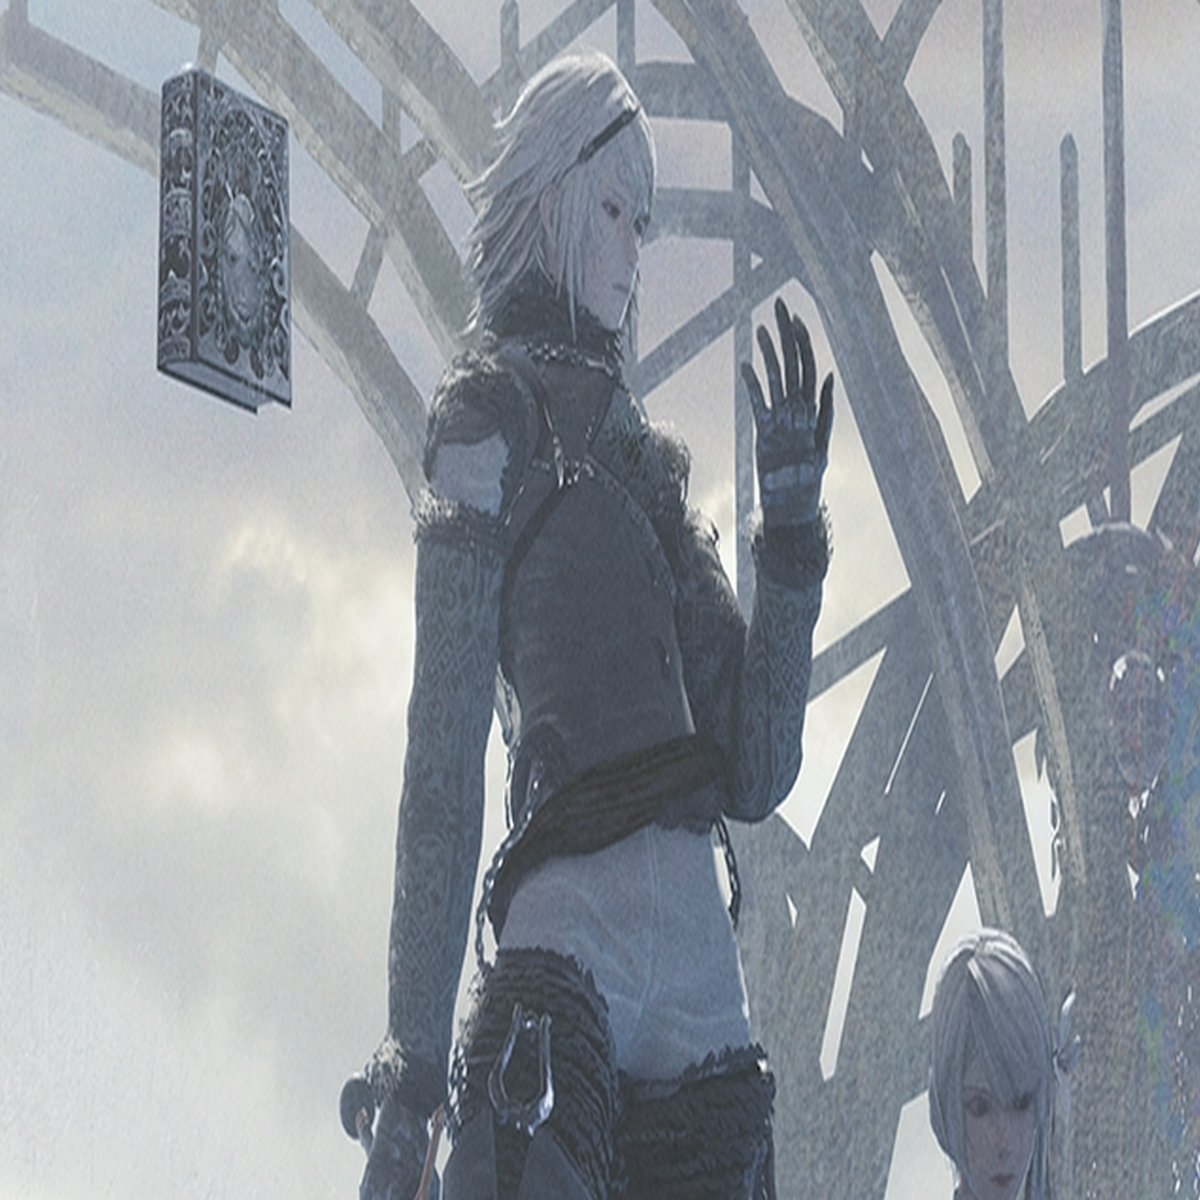 Nier Replicant Devs on Why It's an 'Upgraded Version' Instead of a Remaster  or Remake - Siliconera